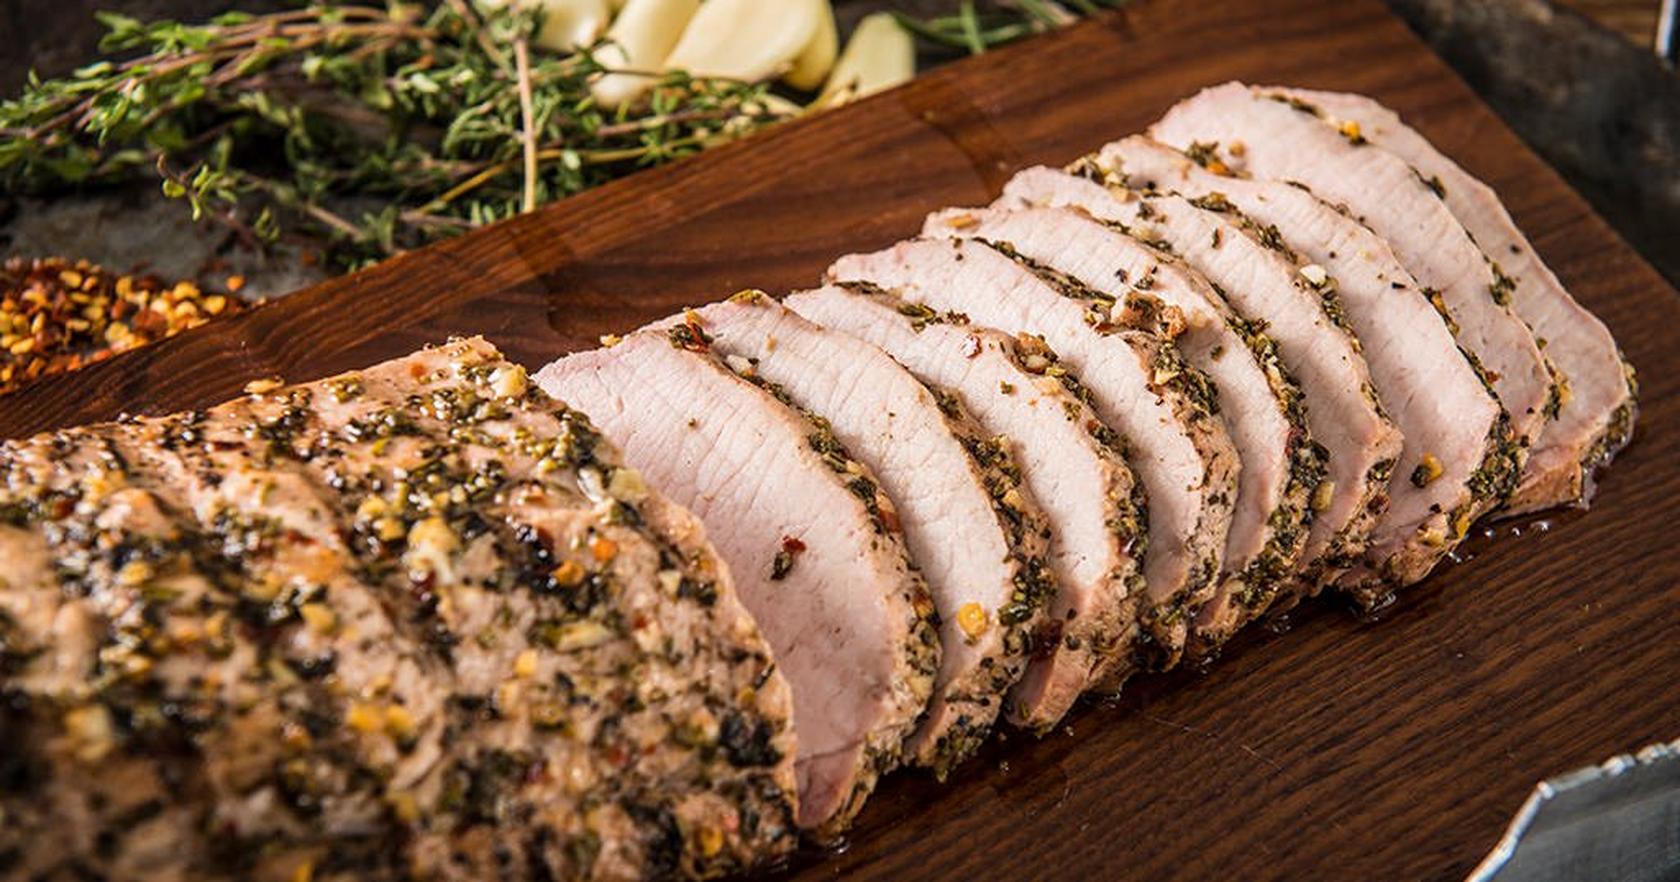 image of Roasted Pork Tenderloin with Garlic and Herbs